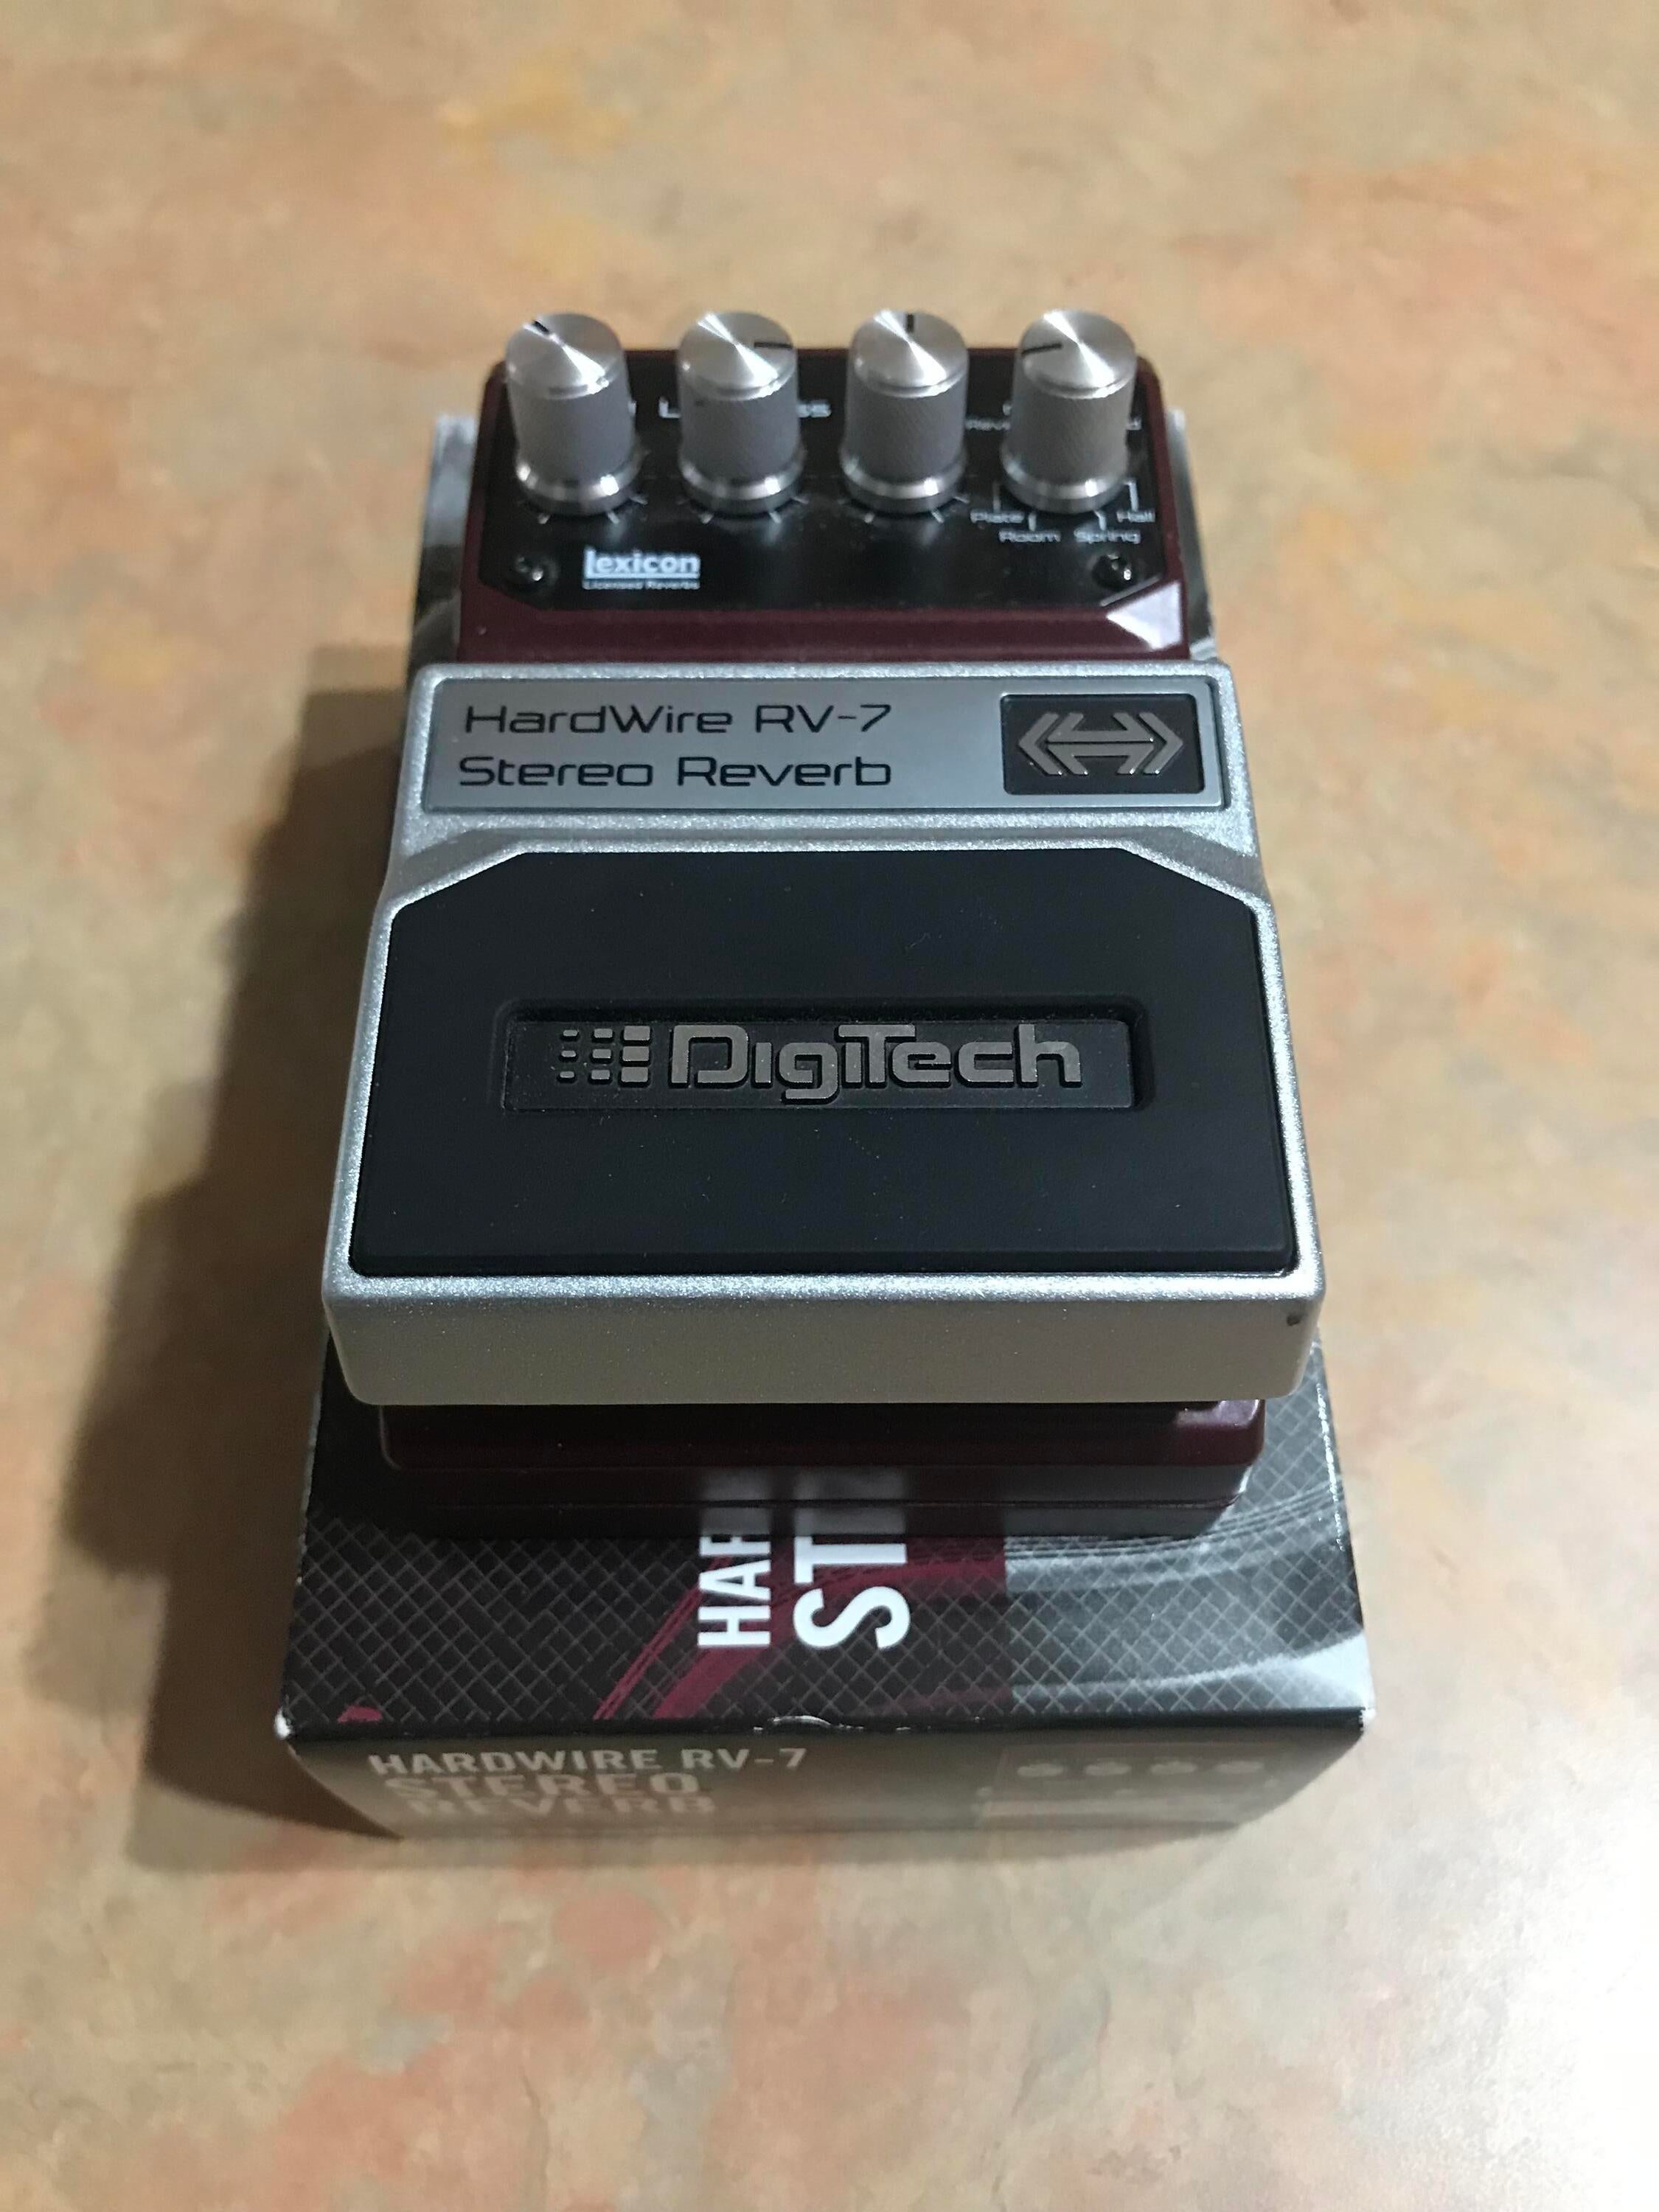 Used Digitech Hardwire RV-7 Digital Reverb Pedal | Sweetwater's